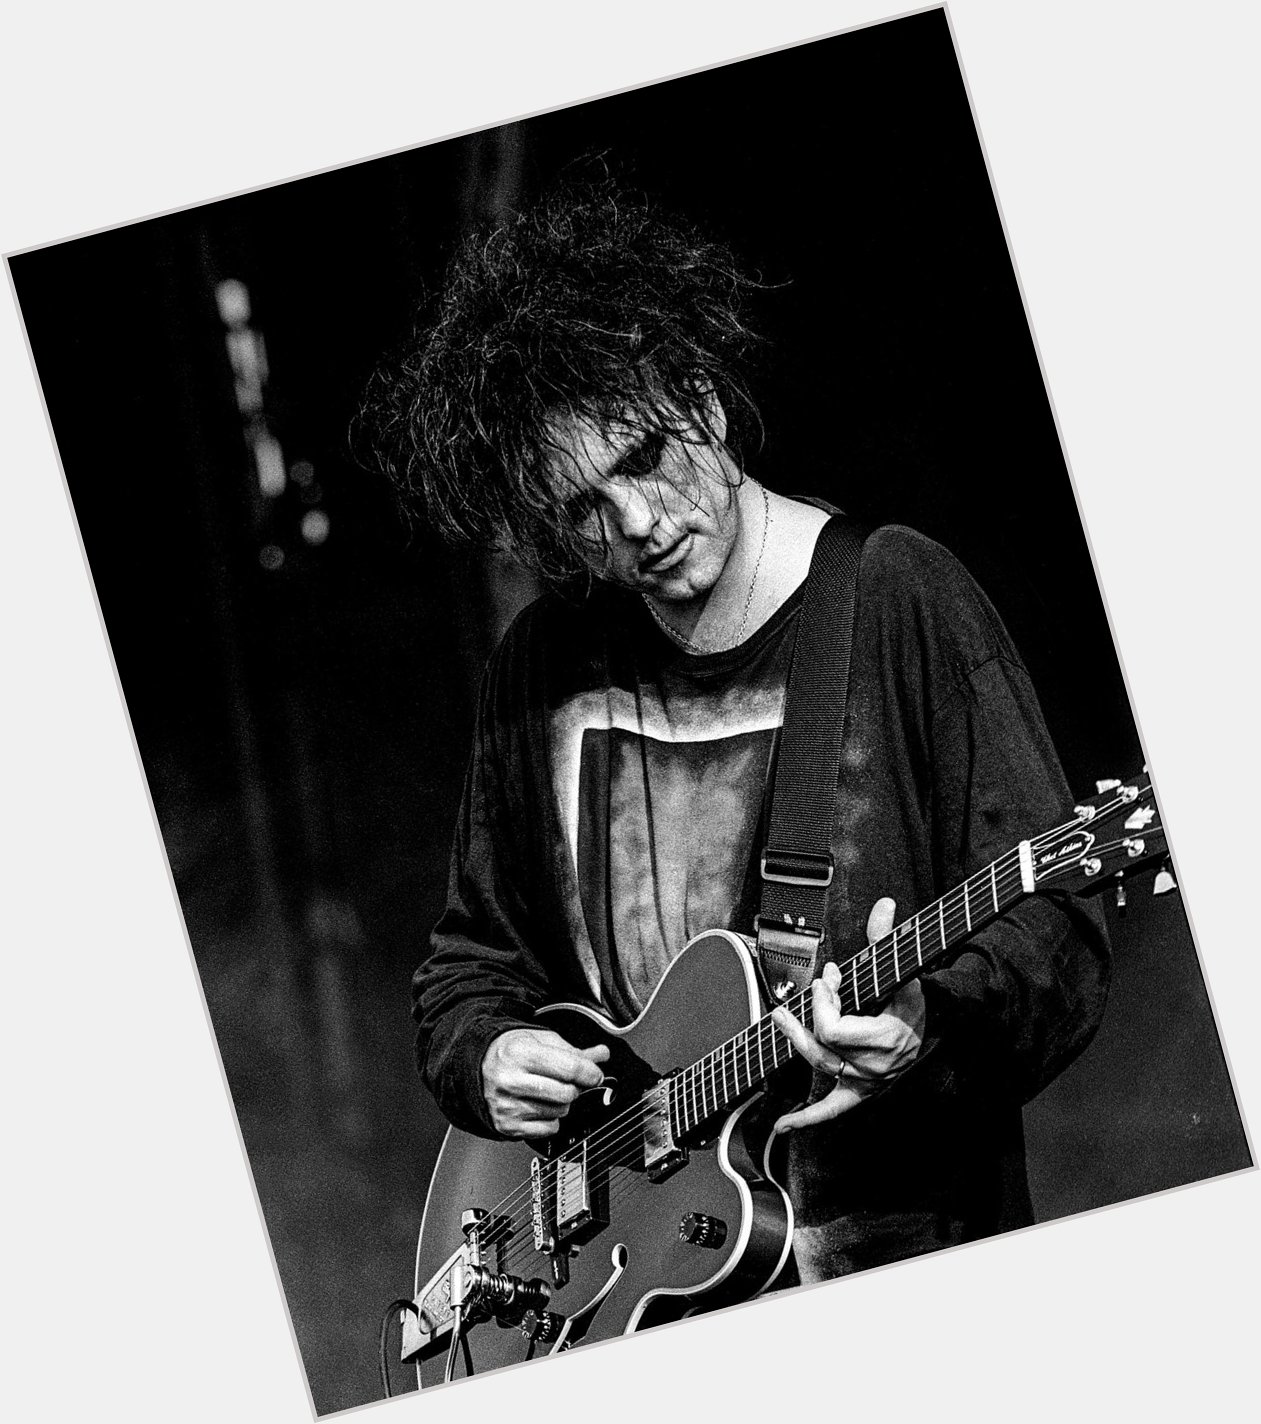  Happy birthday, Robert Smith!

When\s the first time you heard the Cure? 